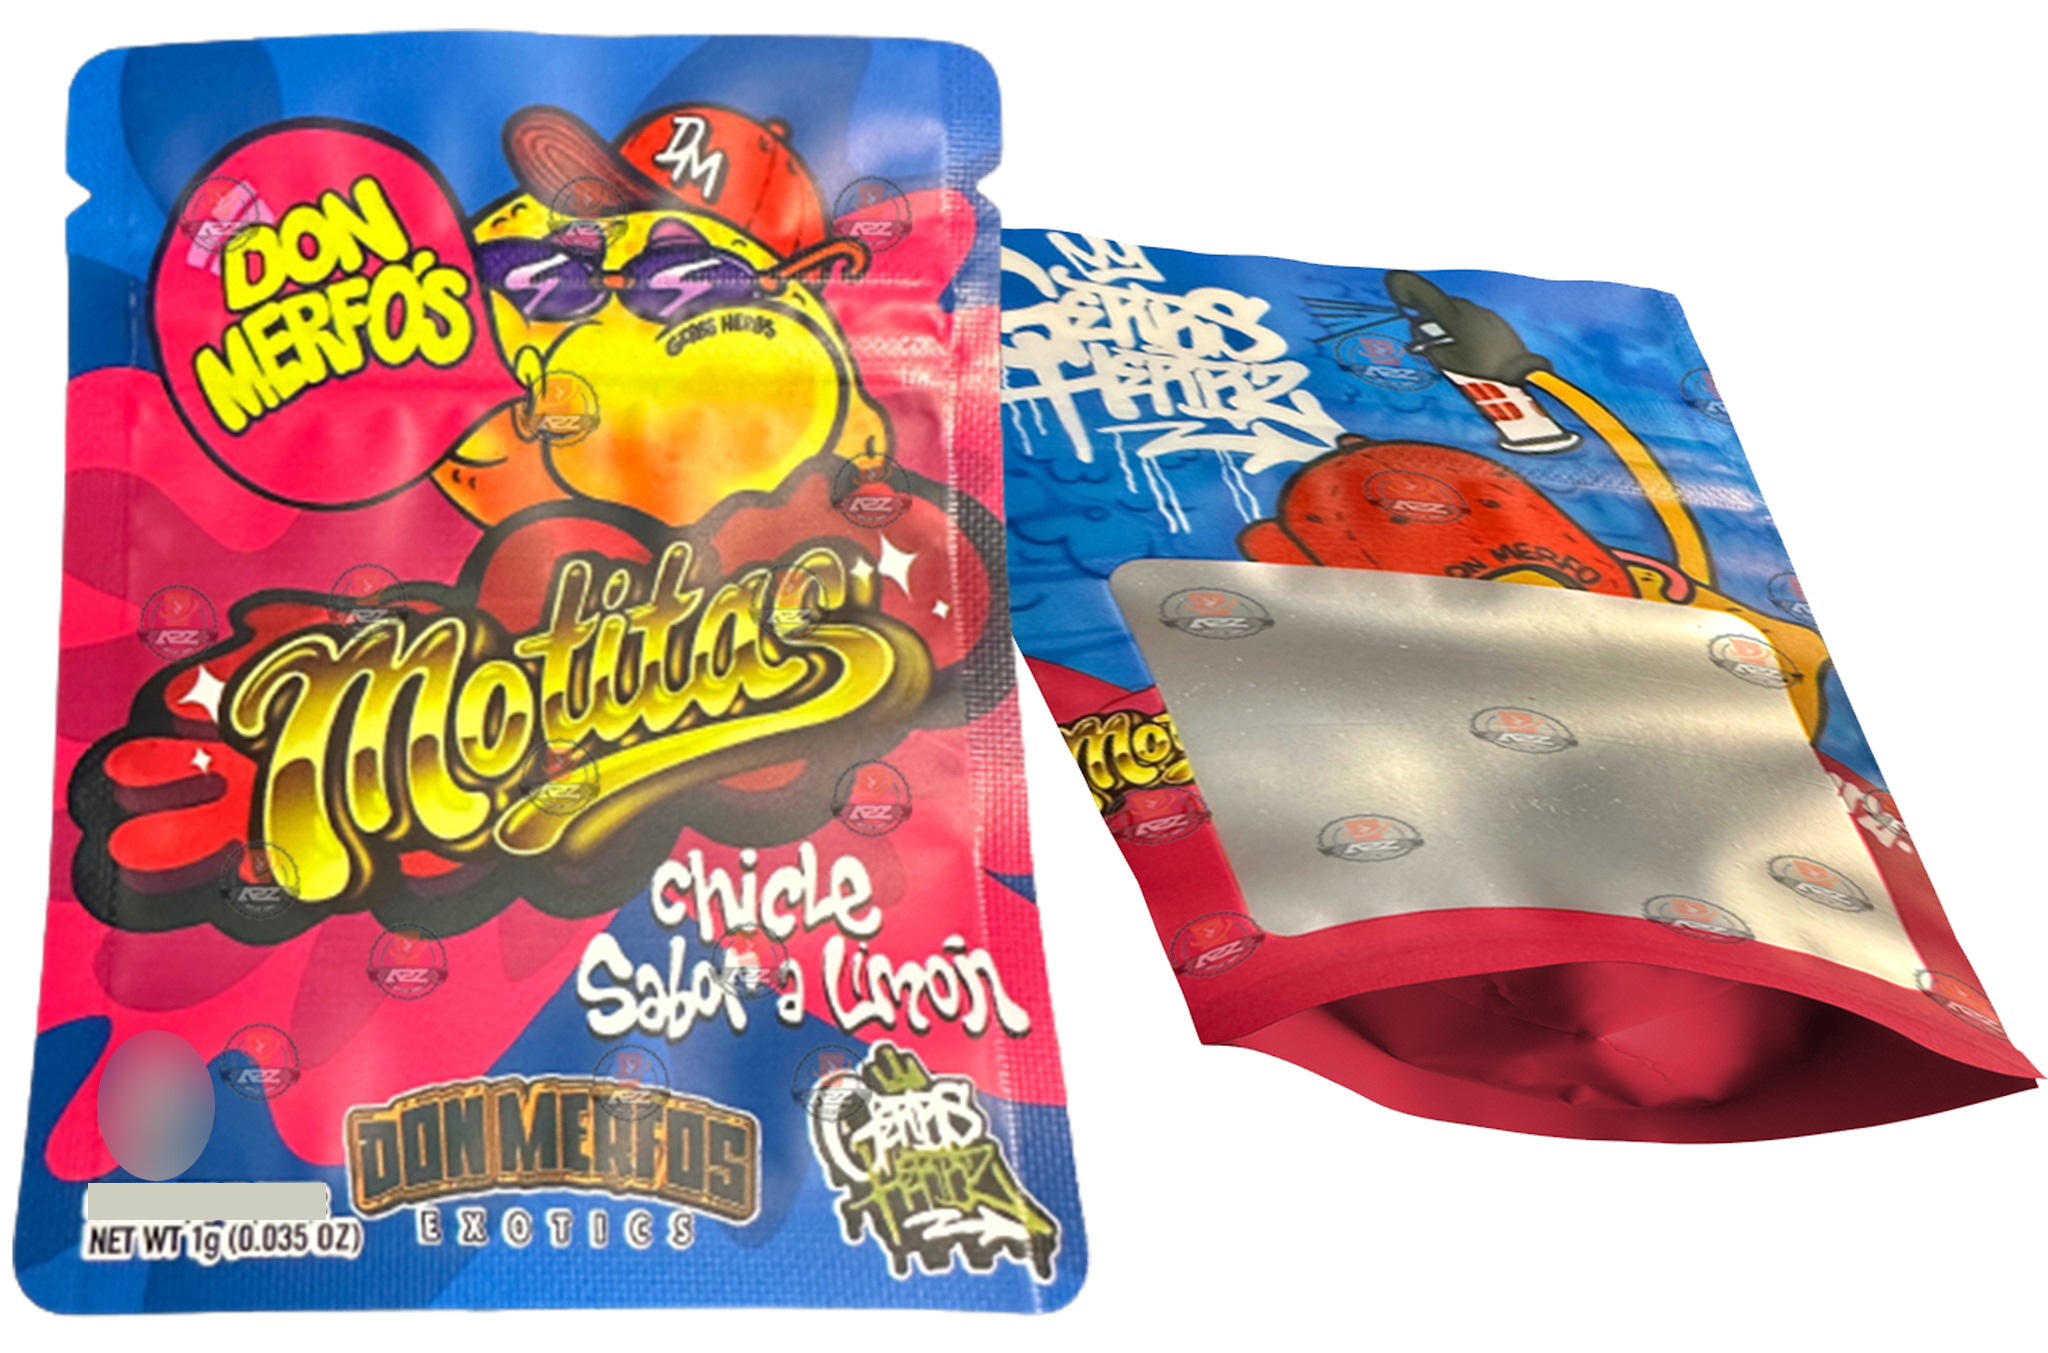 Don Merfos Motitas bag 1 Gram Mylar bags with window - Packaging Only